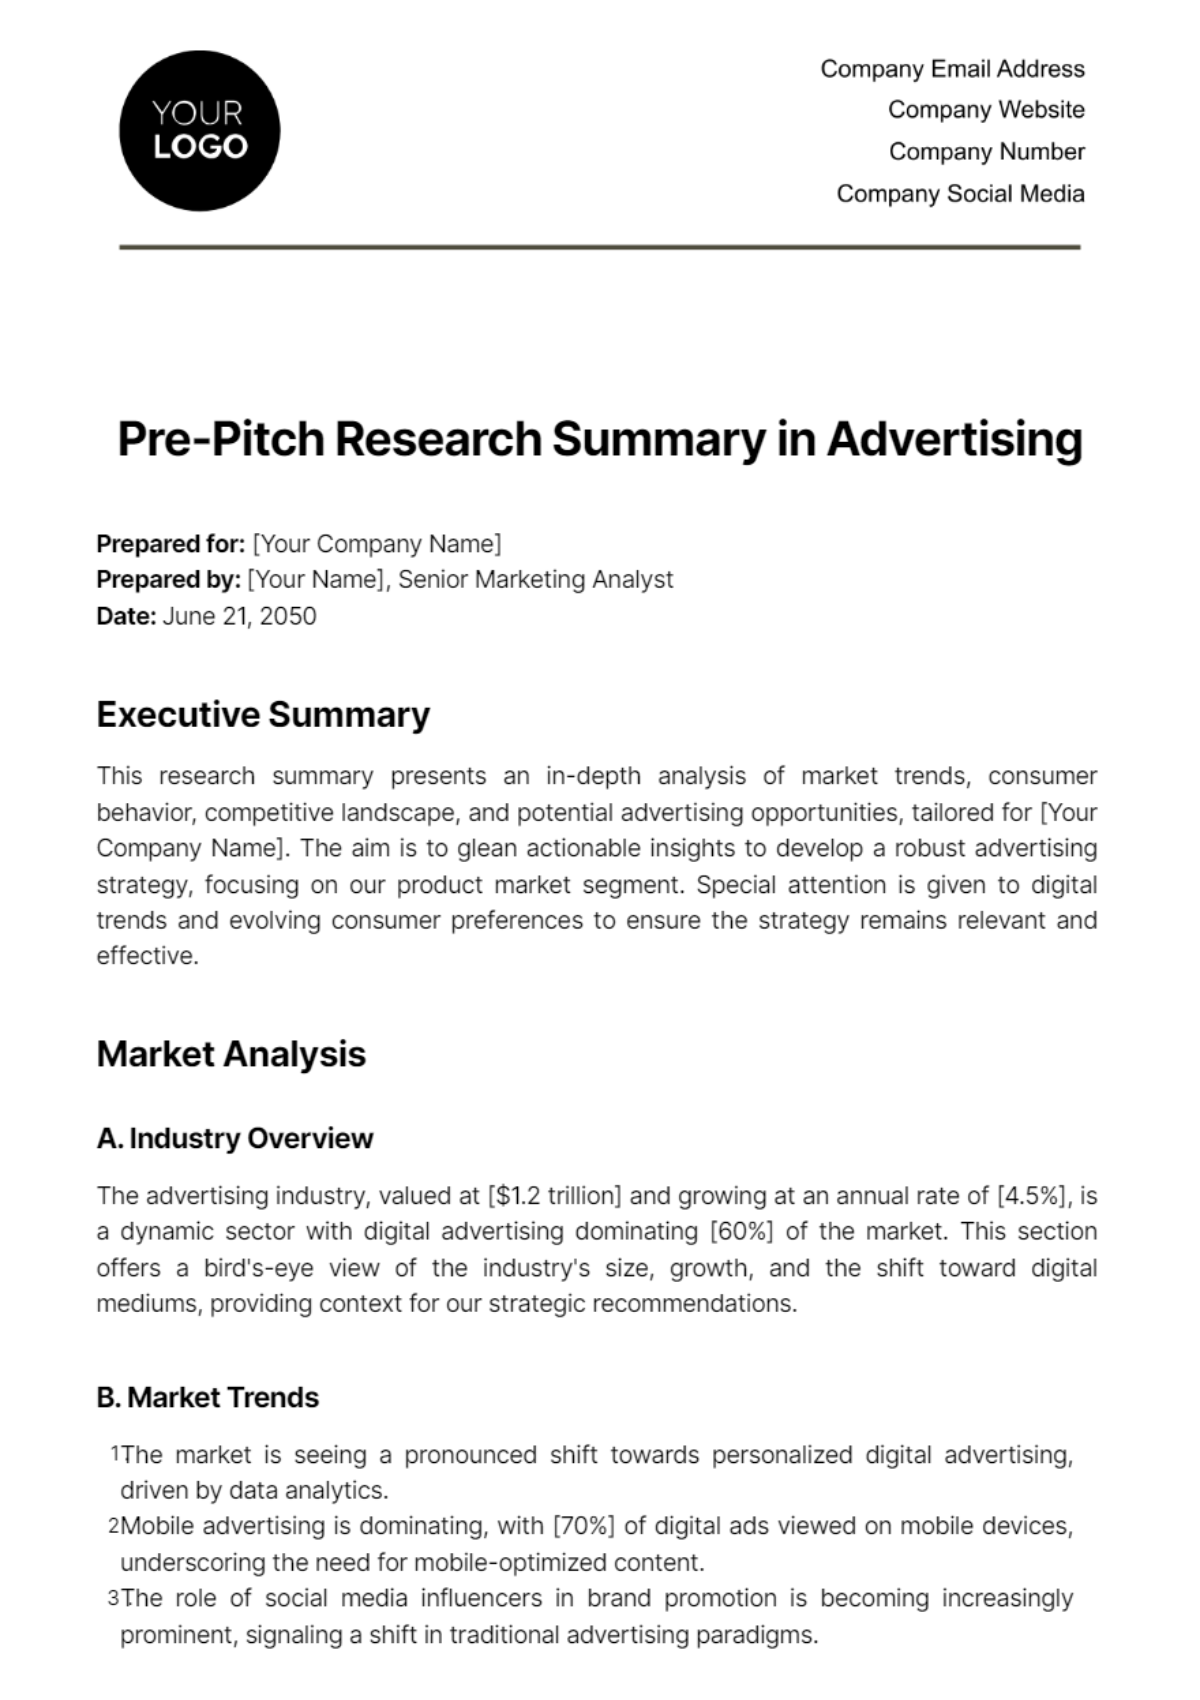 Free Pre-Pitch Research Summary in Advertising Template